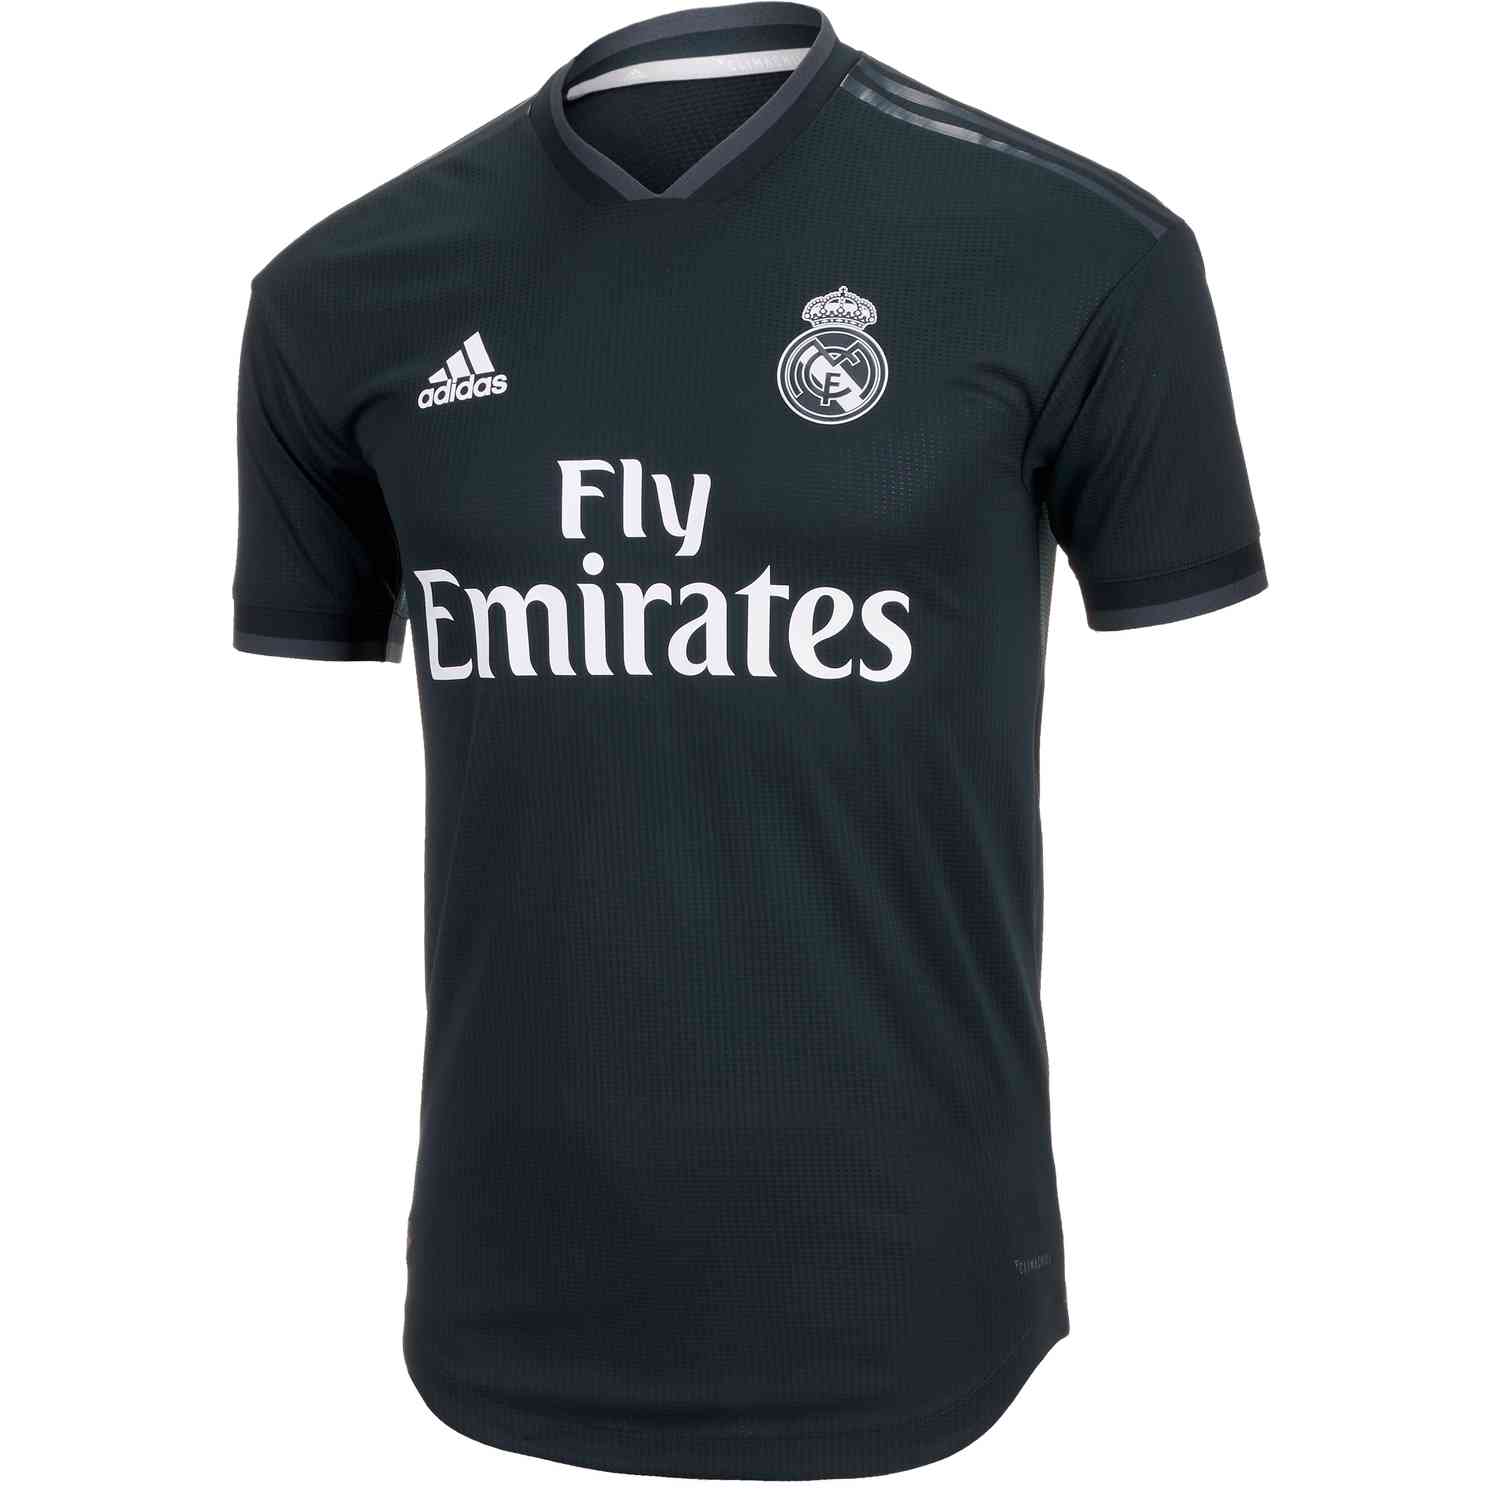 Real Madrid Latest Jersey - 2019/20 adidas Real Madrid Away Authentic